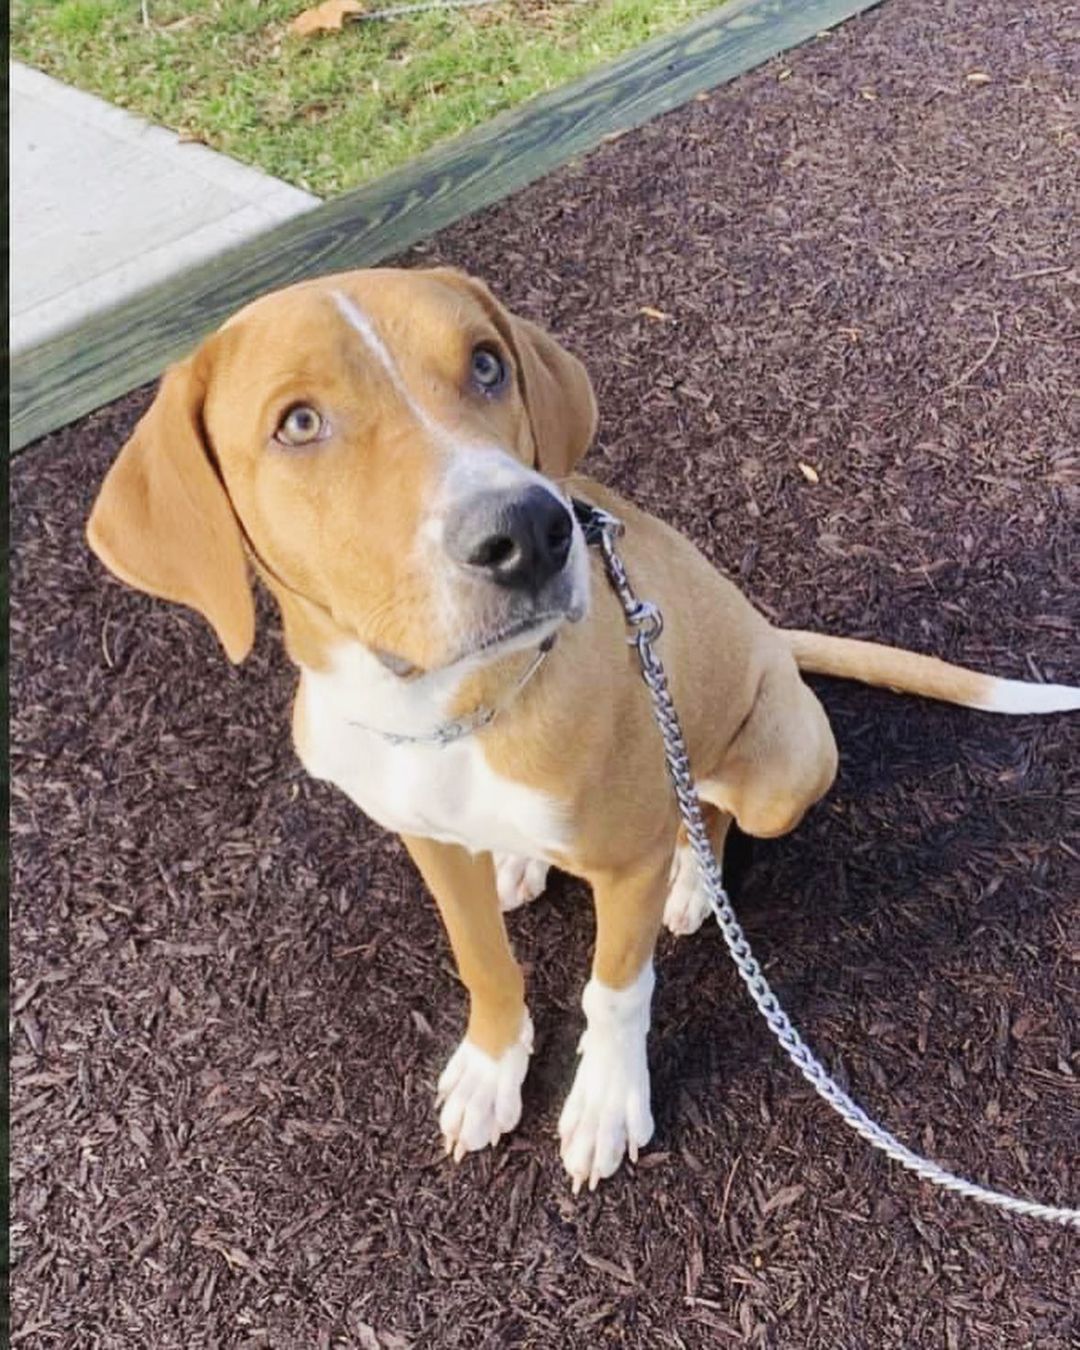 🌟 AVAILABLE 🌟 - Adult hound dog 

Sonic (fka Seamus) is a 1.5yr old very energetic, lovable, and happy hound dog! He loves going for walks, runs, and playing. When outside and able to run you can truly see him come alive. Sonic will benefit from a family with older children that want to play with him and/or adults that are retired, but active, or home where people are home as often as possible as he does not like being home alone for too long. He loves snuggling next to you in the bed or on the couch watching a movie! He does well in his crate, but just like any dog he would prefer to be out. He is house trained too. He is allergic to chicken and shouldn’t have any chicken food/products or byproducts. He enjoys playing with dog toys to help pass time and is a tough chewer! With that he should only have tough toys and if given stuffed ones should be watched as he will happily defluff them ASAP. Sonic does bark at other dogs/people when on leash, but we are working on that with him. He LOVES other dogs and happily plays and bounces around with them. If you believe this happy guy would be the right fit for your home please use the link below to submit an application. 

Adoption Application Link: https://airtable.com/shr305FuyR4v4JWQb

Website Link: https://furrytalesrescue.wixsite.com/home

Petfinder Link: https://www.petfinder.com/dog/sonic-fka-seamus-49678199/pa/blue-bell/furry-tales-animal-rescue-pa1105/

** We are based out of Blue Bell, PA. We allow adoptions to PA, NJ, MD, DE, VA, WV, CT and NY. At this time we do not adopt out to homes who are over ~200 miles from our location. **

.
.
.
.
.
<a target='_blank' href='https://www.instagram.com/explore/tags/rescuedog/'>#rescuedog</a> <a target='_blank' href='https://www.instagram.com/explore/tags/happydog/'>#happydog</a> <a target='_blank' href='https://www.instagram.com/explore/tags/fall/'>#fall</a> <a target='_blank' href='https://www.instagram.com/explore/tags/hound/'>#hound</a> <a target='_blank' href='https://www.instagram.com/explore/tags/hounddog/'>#hounddog</a> <a target='_blank' href='https://www.instagram.com/explore/tags/hounddogsofinstagram/'>#hounddogsofinstagram</a> <a target='_blank' href='https://www.instagram.com/explore/tags/seamus/'>#seamus</a> <a target='_blank' href='https://www.instagram.com/explore/tags/sonic/'>#sonic</a> <a target='_blank' href='https://www.instagram.com/explore/tags/bonesday/'>#bonesday</a> <a target='_blank' href='https://www.instagram.com/explore/tags/nobonesday/'>#nobonesday</a> <a target='_blank' href='https://www.instagram.com/explore/tags/roll/'>#roll</a> <a target='_blank' href='https://www.instagram.com/explore/tags/leaves/'>#leaves</a> <a target='_blank' href='https://www.instagram.com/explore/tags/puppy/'>#puppy</a> <a target='_blank' href='https://www.instagram.com/explore/tags/puppiesofinstagram/'>#puppiesofinstagram</a> <a target='_blank' href='https://www.instagram.com/explore/tags/adoptme/'>#adoptme</a> <a target='_blank' href='https://www.instagram.com/explore/tags/adoptable/'>#adoptable</a> <a target='_blank' href='https://www.instagram.com/explore/tags/love/'>#love</a> <a target='_blank' href='https://www.instagram.com/explore/tags/toocute/'>#toocute</a> <a target='_blank' href='https://www.instagram.com/explore/tags/dog/'>#dog</a> <a target='_blank' href='https://www.instagram.com/explore/tags/dogs/'>#dogs</a> <a target='_blank' href='https://www.instagram.com/explore/tags/bigboy/'>#bigboy</a>